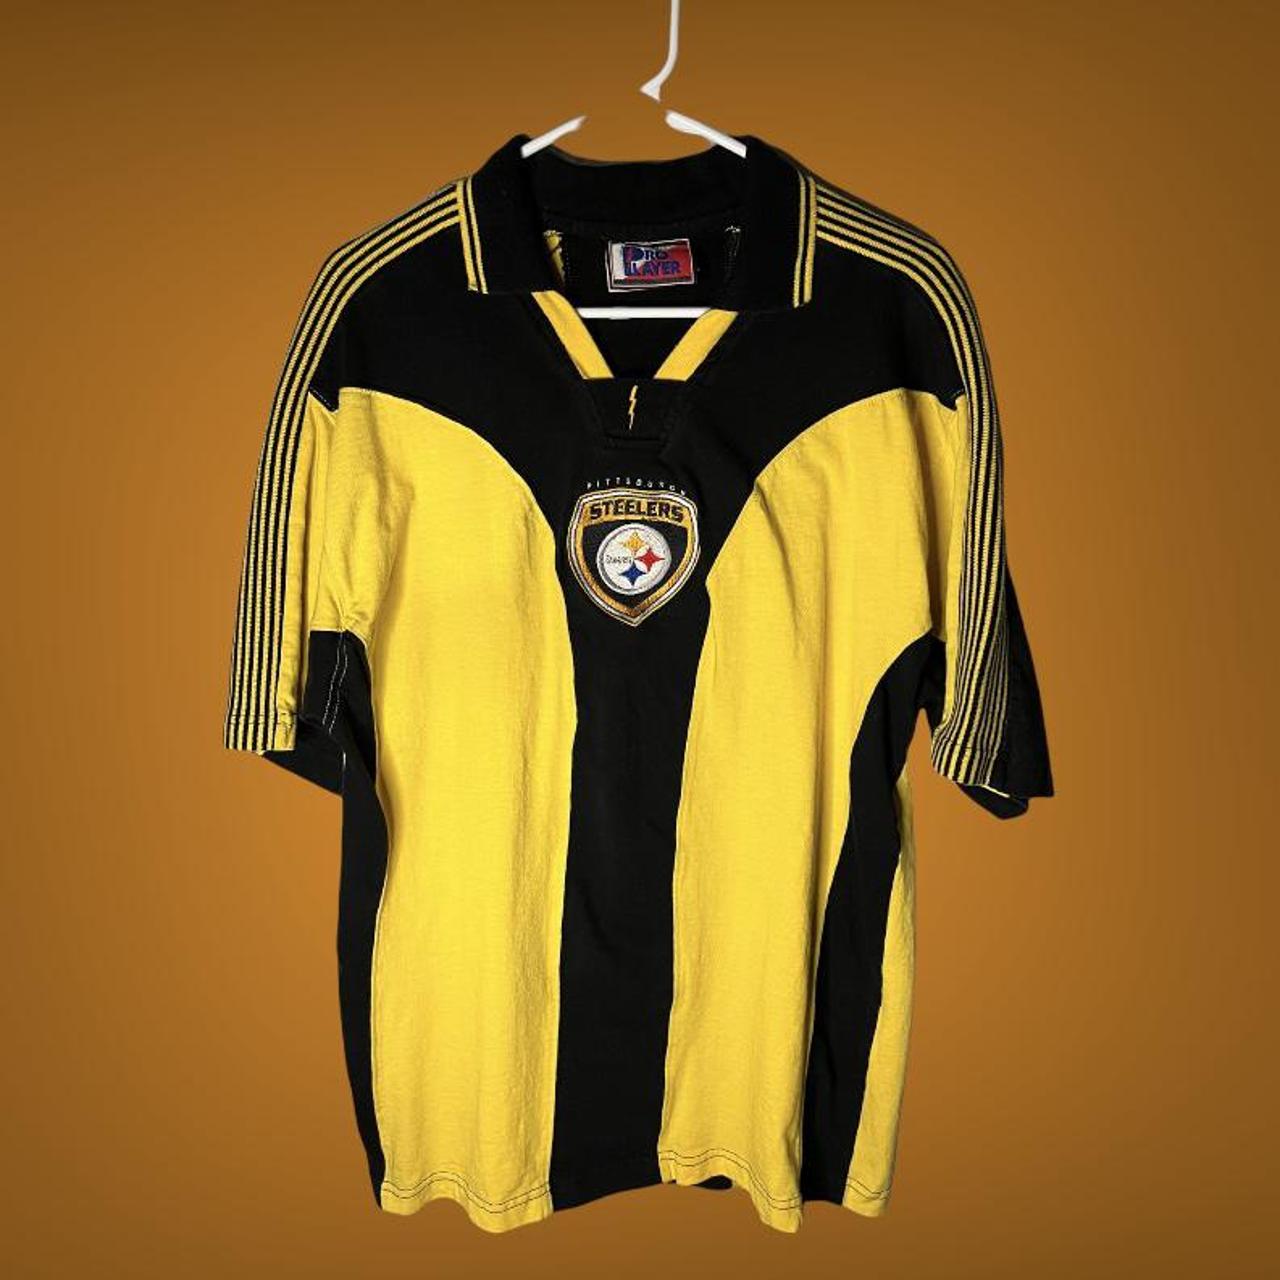 Men's Black and Yellow Polo-shirts